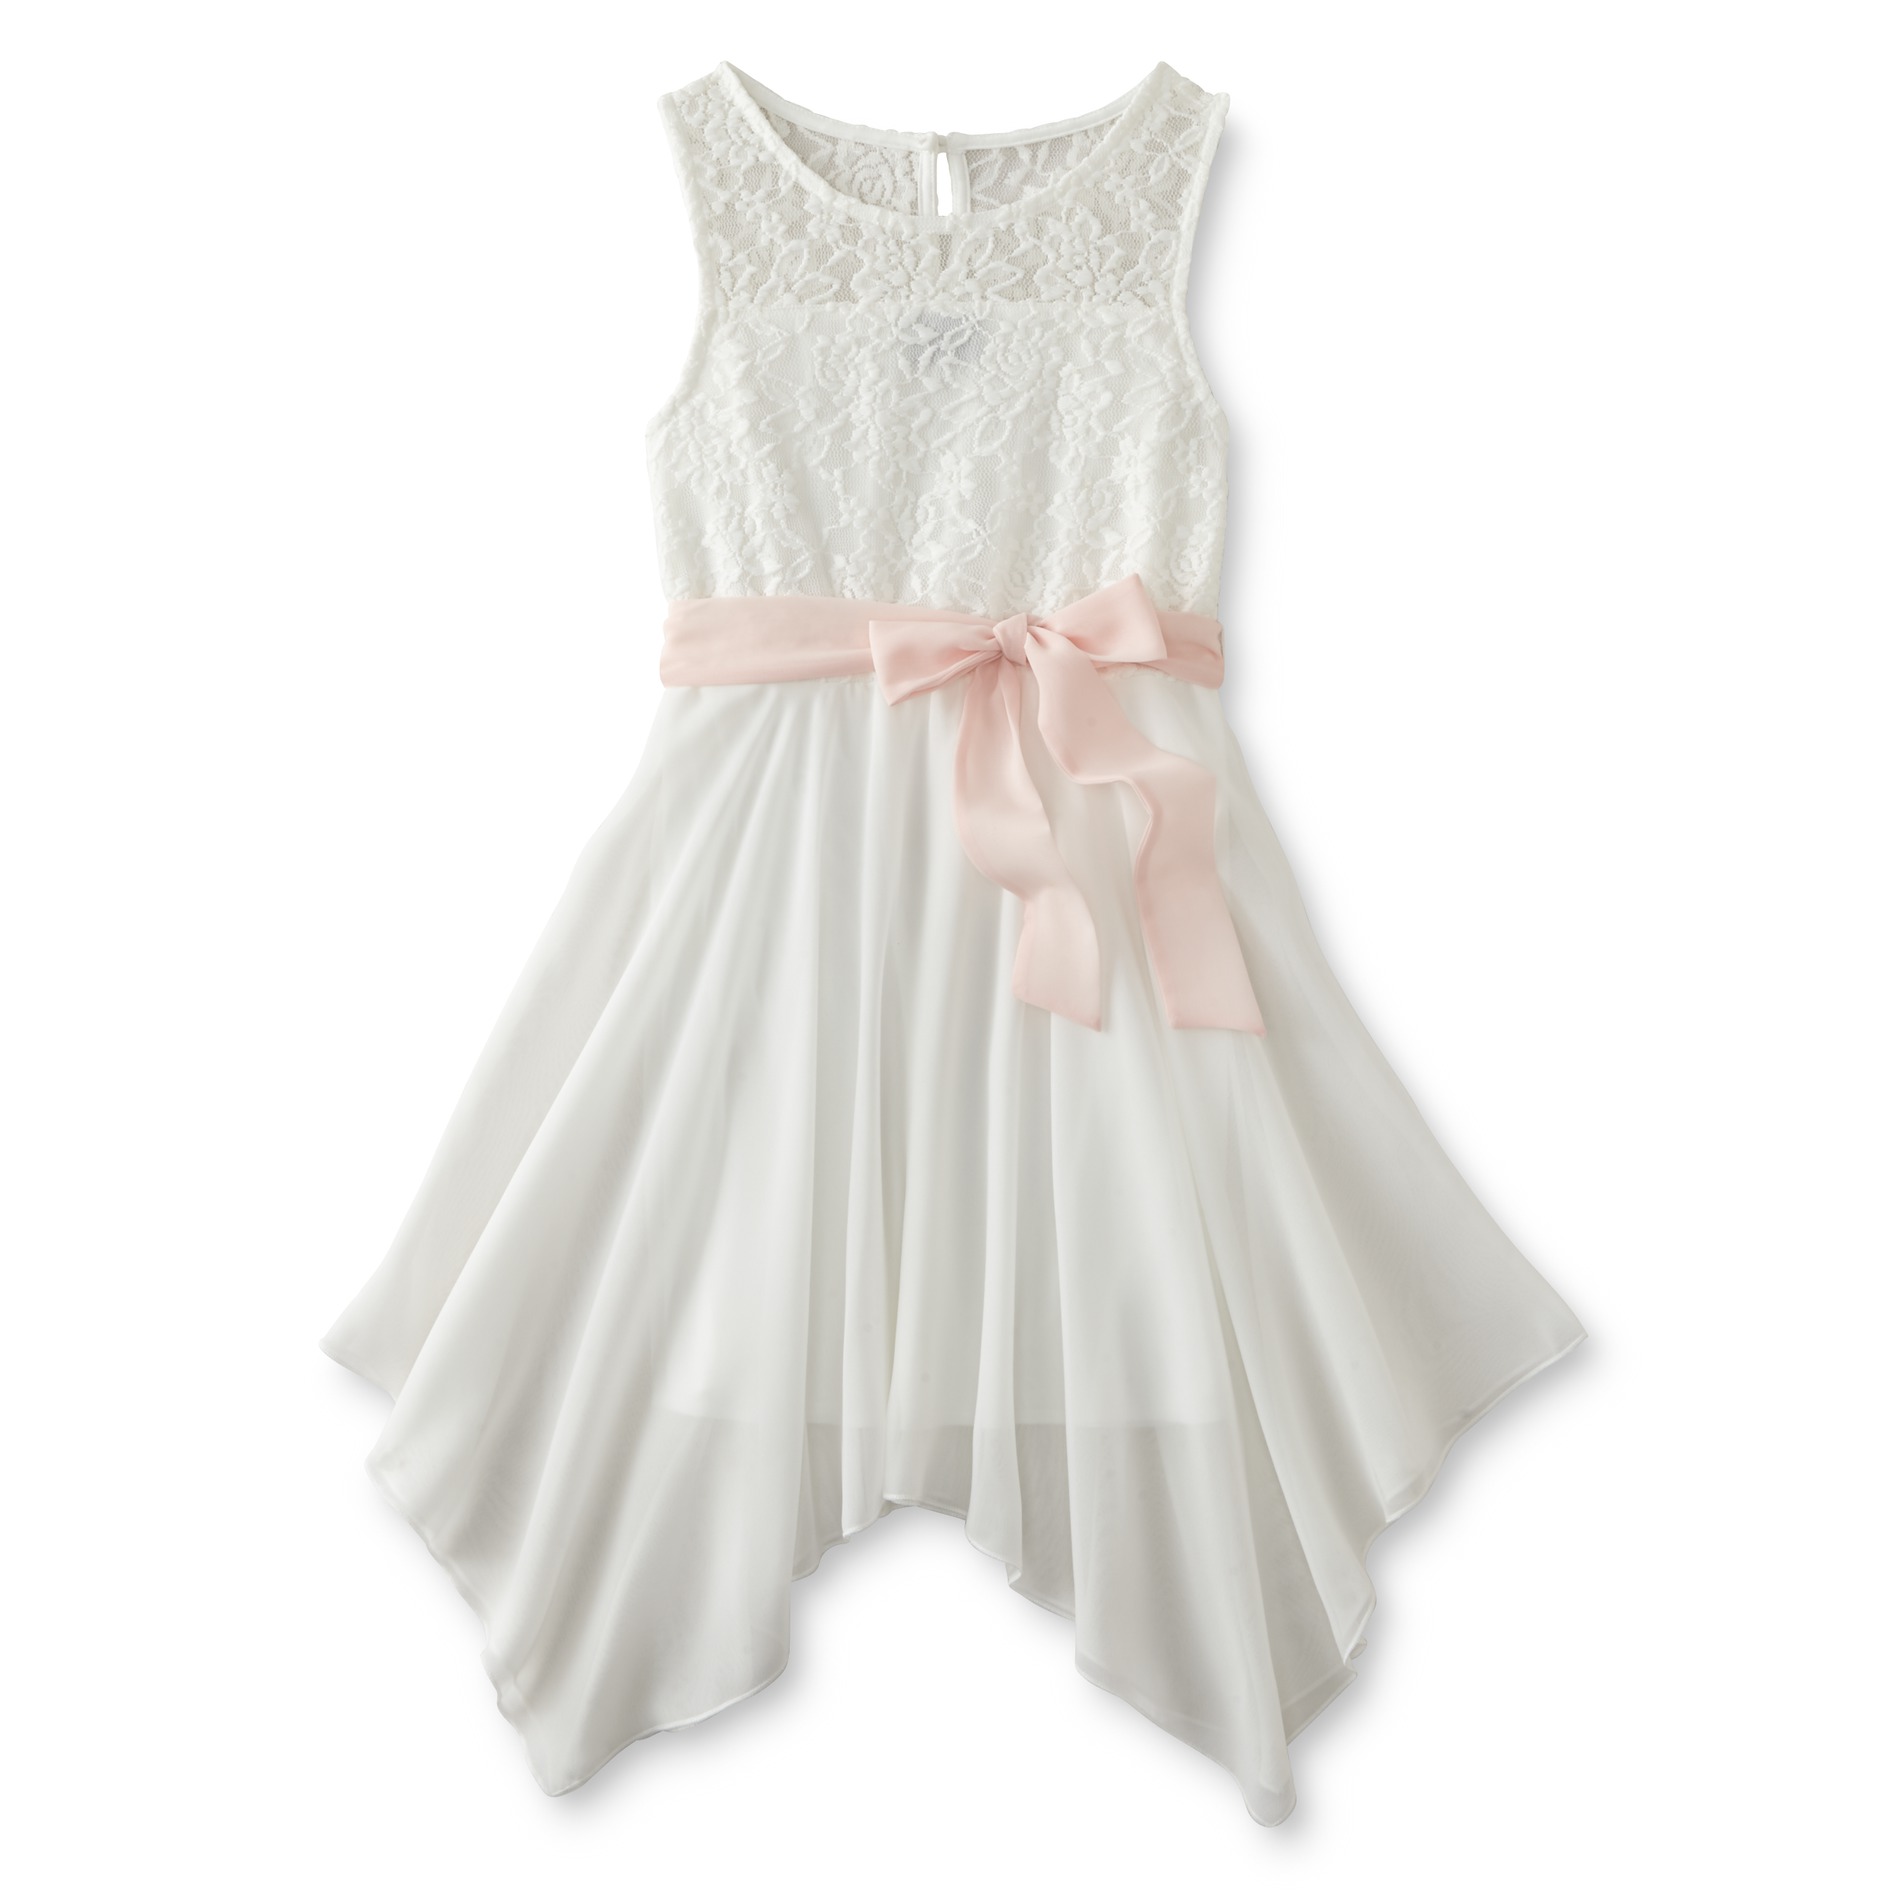 Holiday Editions Girl's Lace Occasion Dress